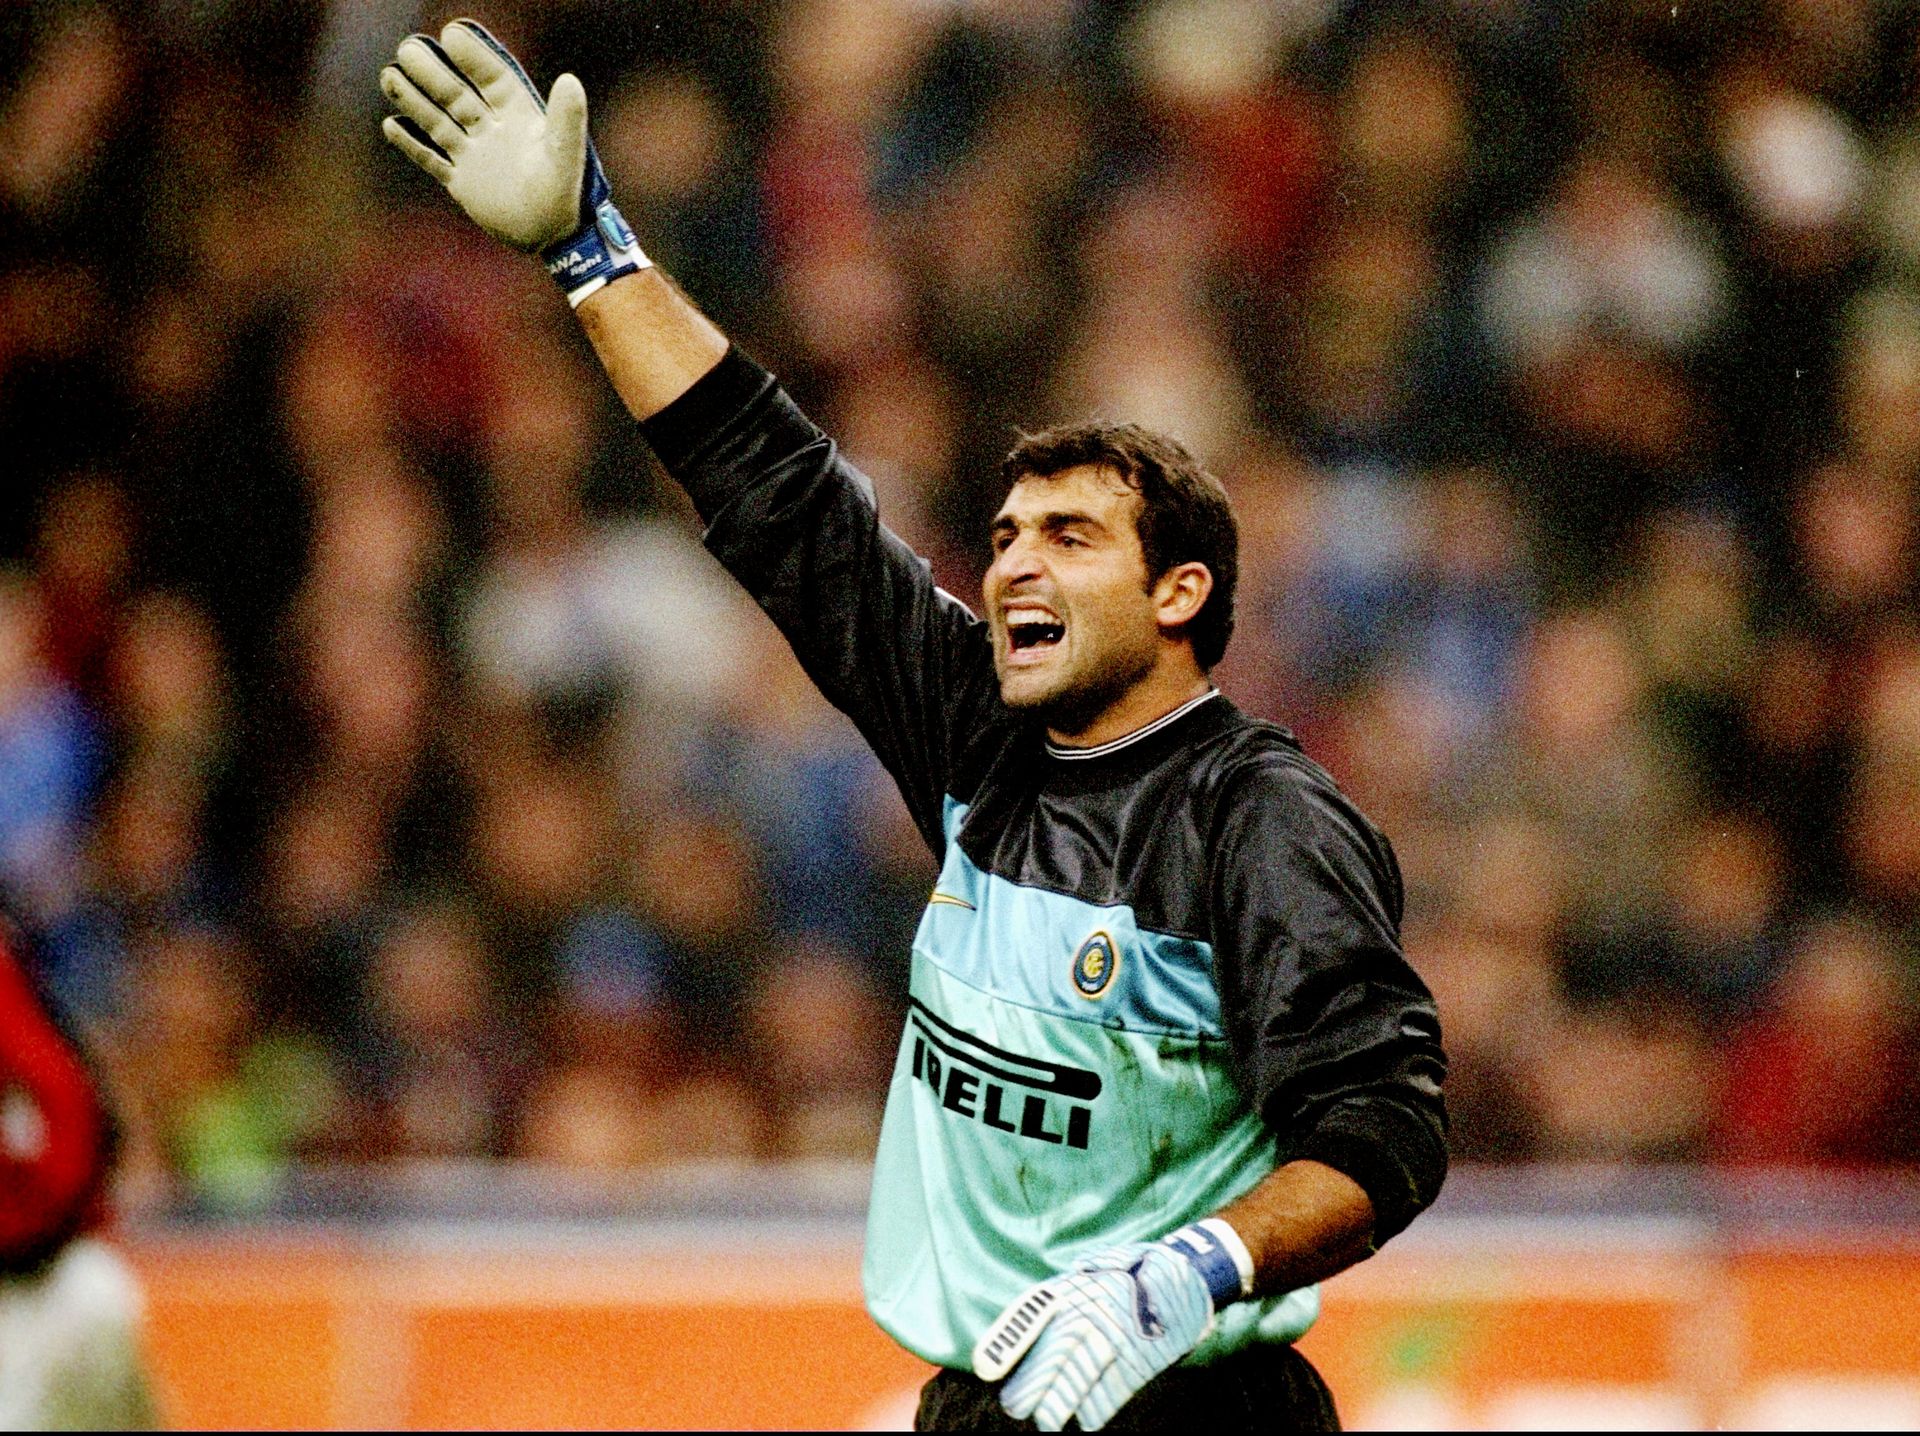 <p>                     He may have been in Gianluigi Buffon's sizeable shadow for virtually his entire career at international level, but Angelo Peruzzi was a great goalkeeper in the 1990s and early 2000s.                   </p>                                      <p>                     After eight years at Juventus, Peruzzi signed for Inter in a deal worth around €19 million in 1999. He impressed in Milan, but was sold to Lazio for an even bigger fee the following summer and was part of Italy's World Cup-winning squad in 2006.                   </p>